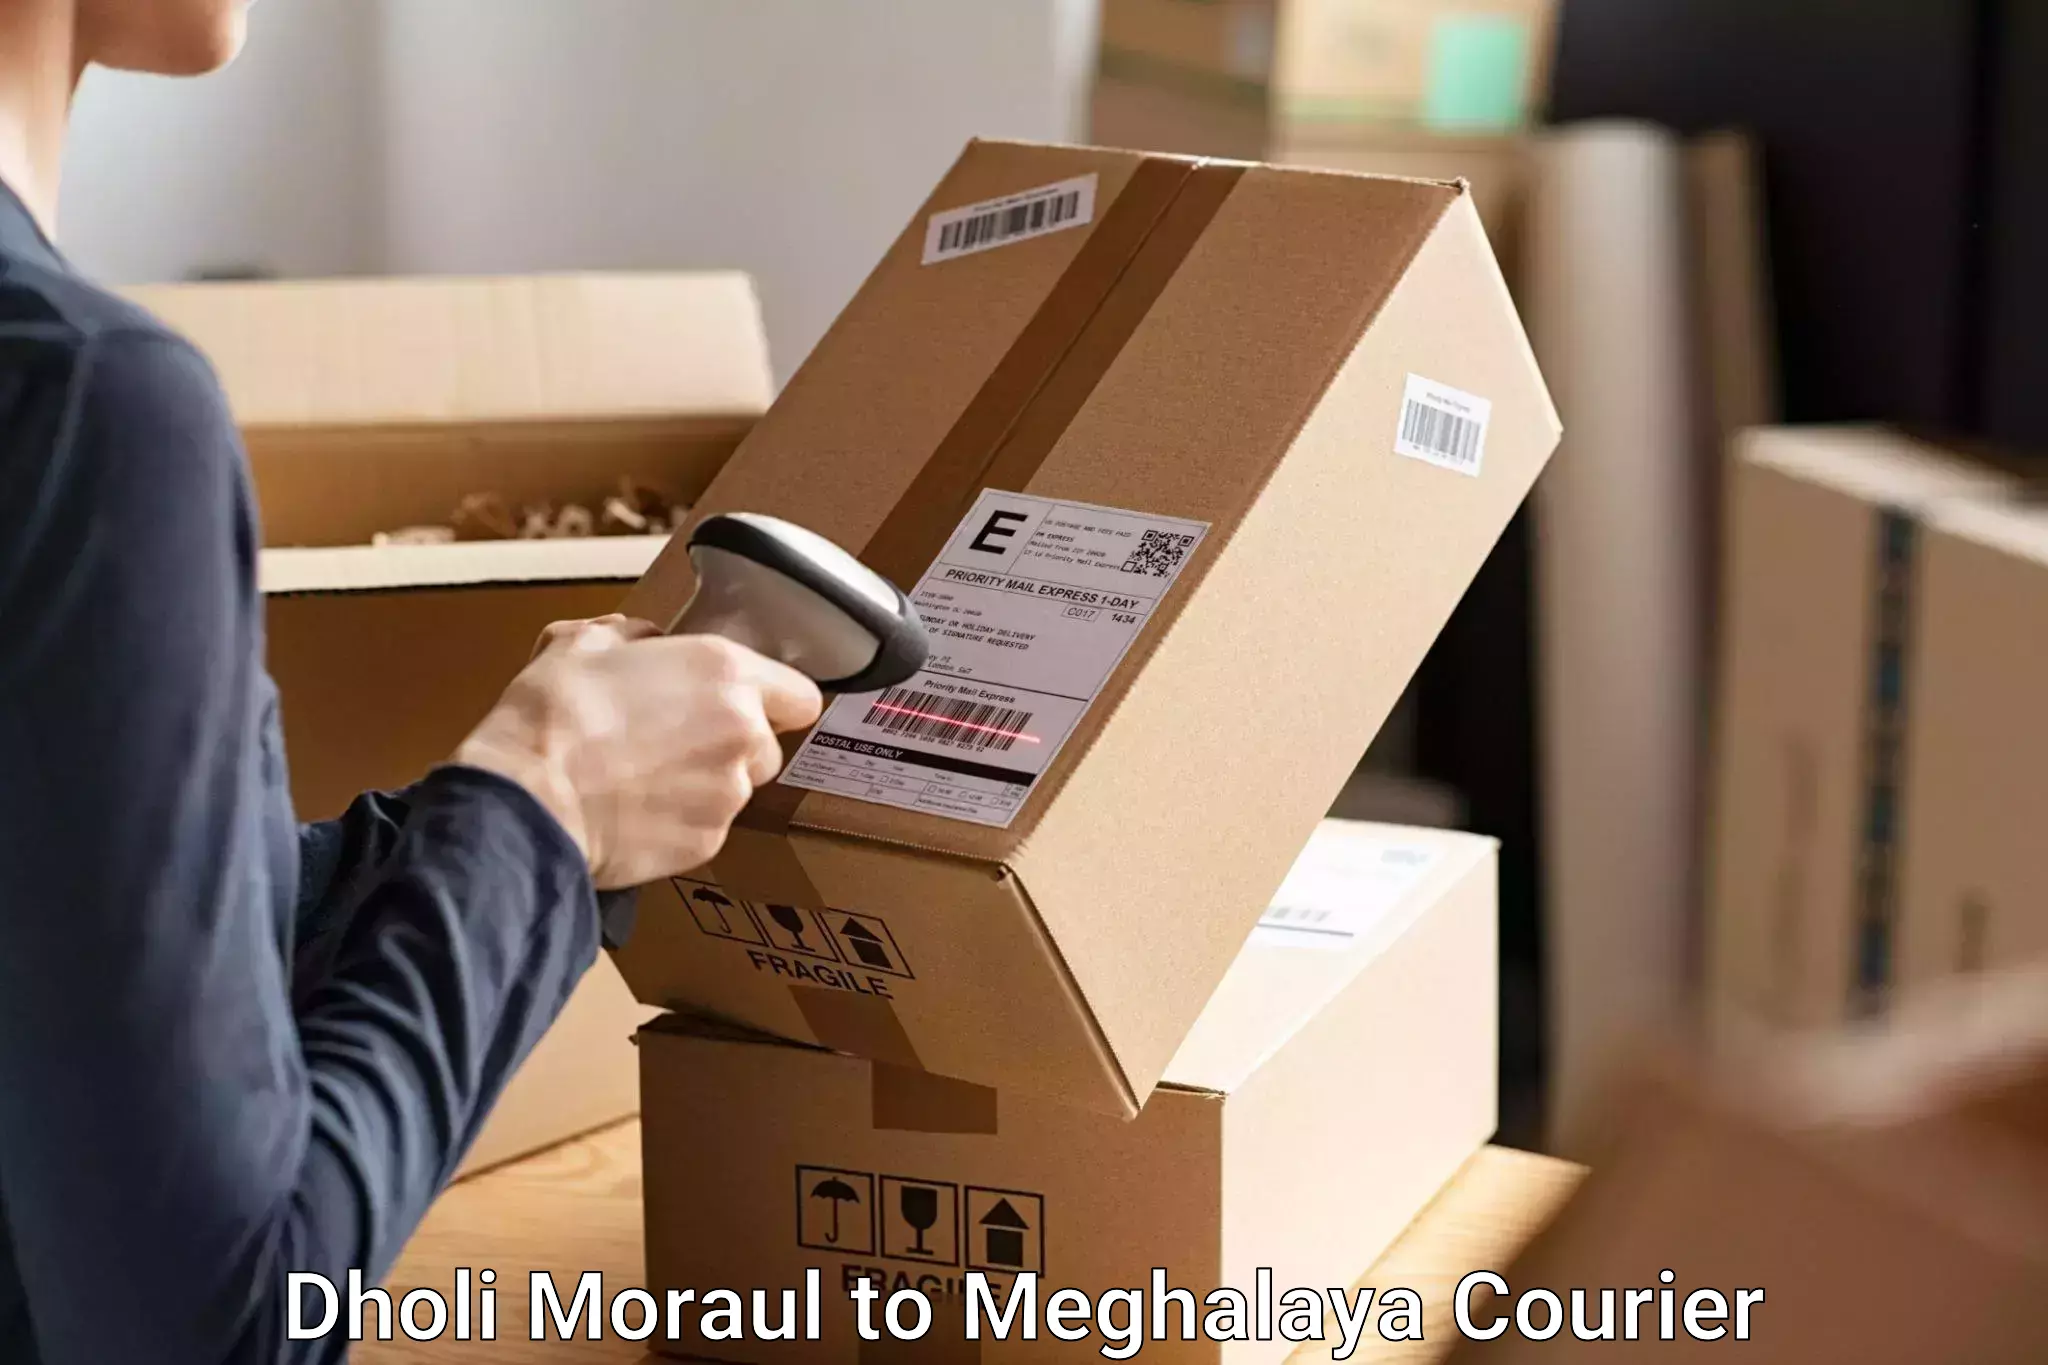 Personal effects shipping Dholi Moraul to Nongpoh